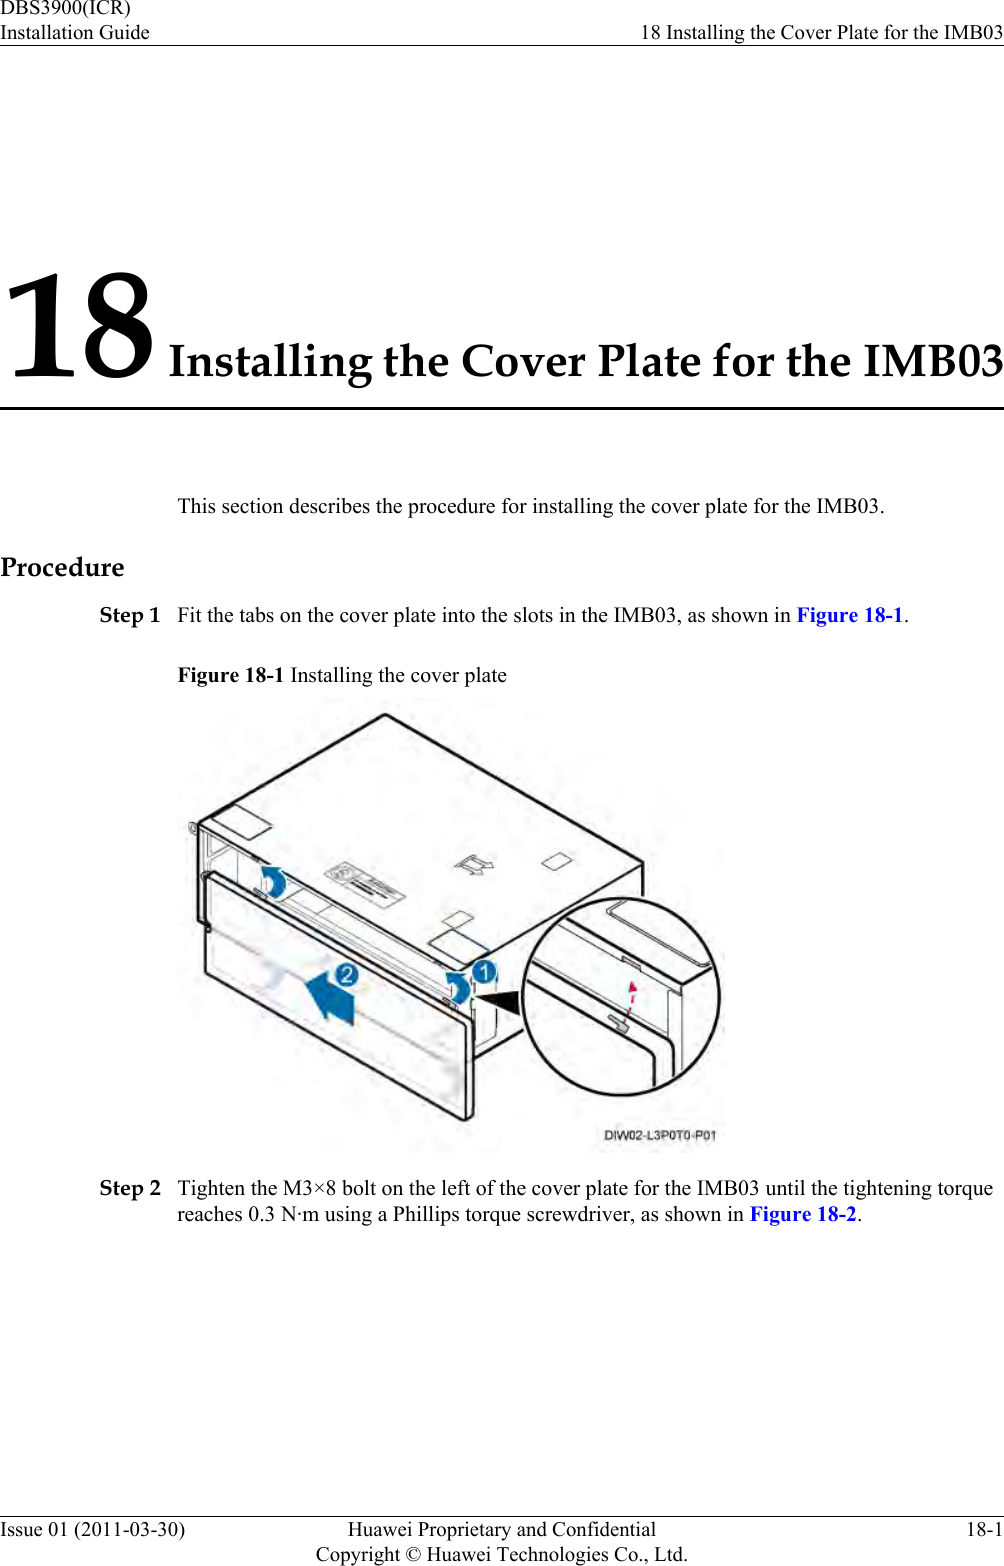 18 Installing the Cover Plate for the IMB03This section describes the procedure for installing the cover plate for the IMB03.ProcedureStep 1 Fit the tabs on the cover plate into the slots in the IMB03, as shown in Figure 18-1.Figure 18-1 Installing the cover plateStep 2 Tighten the M3×8 bolt on the left of the cover plate for the IMB03 until the tightening torquereaches 0.3 N·m using a Phillips torque screwdriver, as shown in Figure 18-2.DBS3900(ICR)Installation Guide 18 Installing the Cover Plate for the IMB03Issue 01 (2011-03-30) Huawei Proprietary and ConfidentialCopyright © Huawei Technologies Co., Ltd.18-1